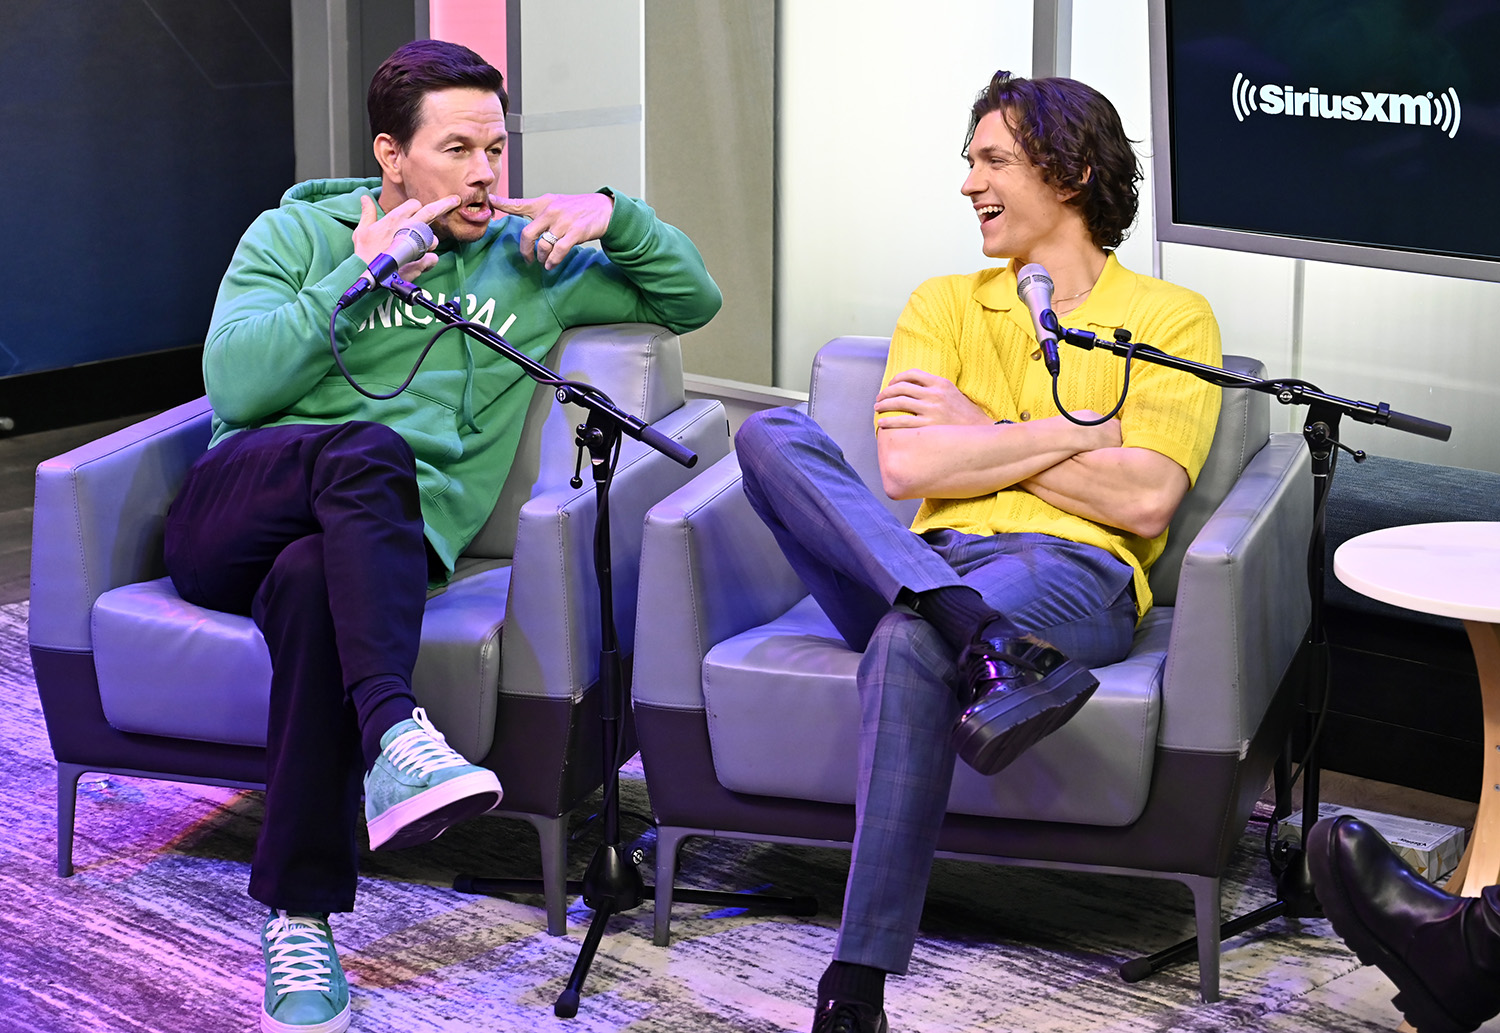 Uncharted stars Mark Wahlberg and Tom Holland at SiriusXM ahead of the digital and DVD releases.